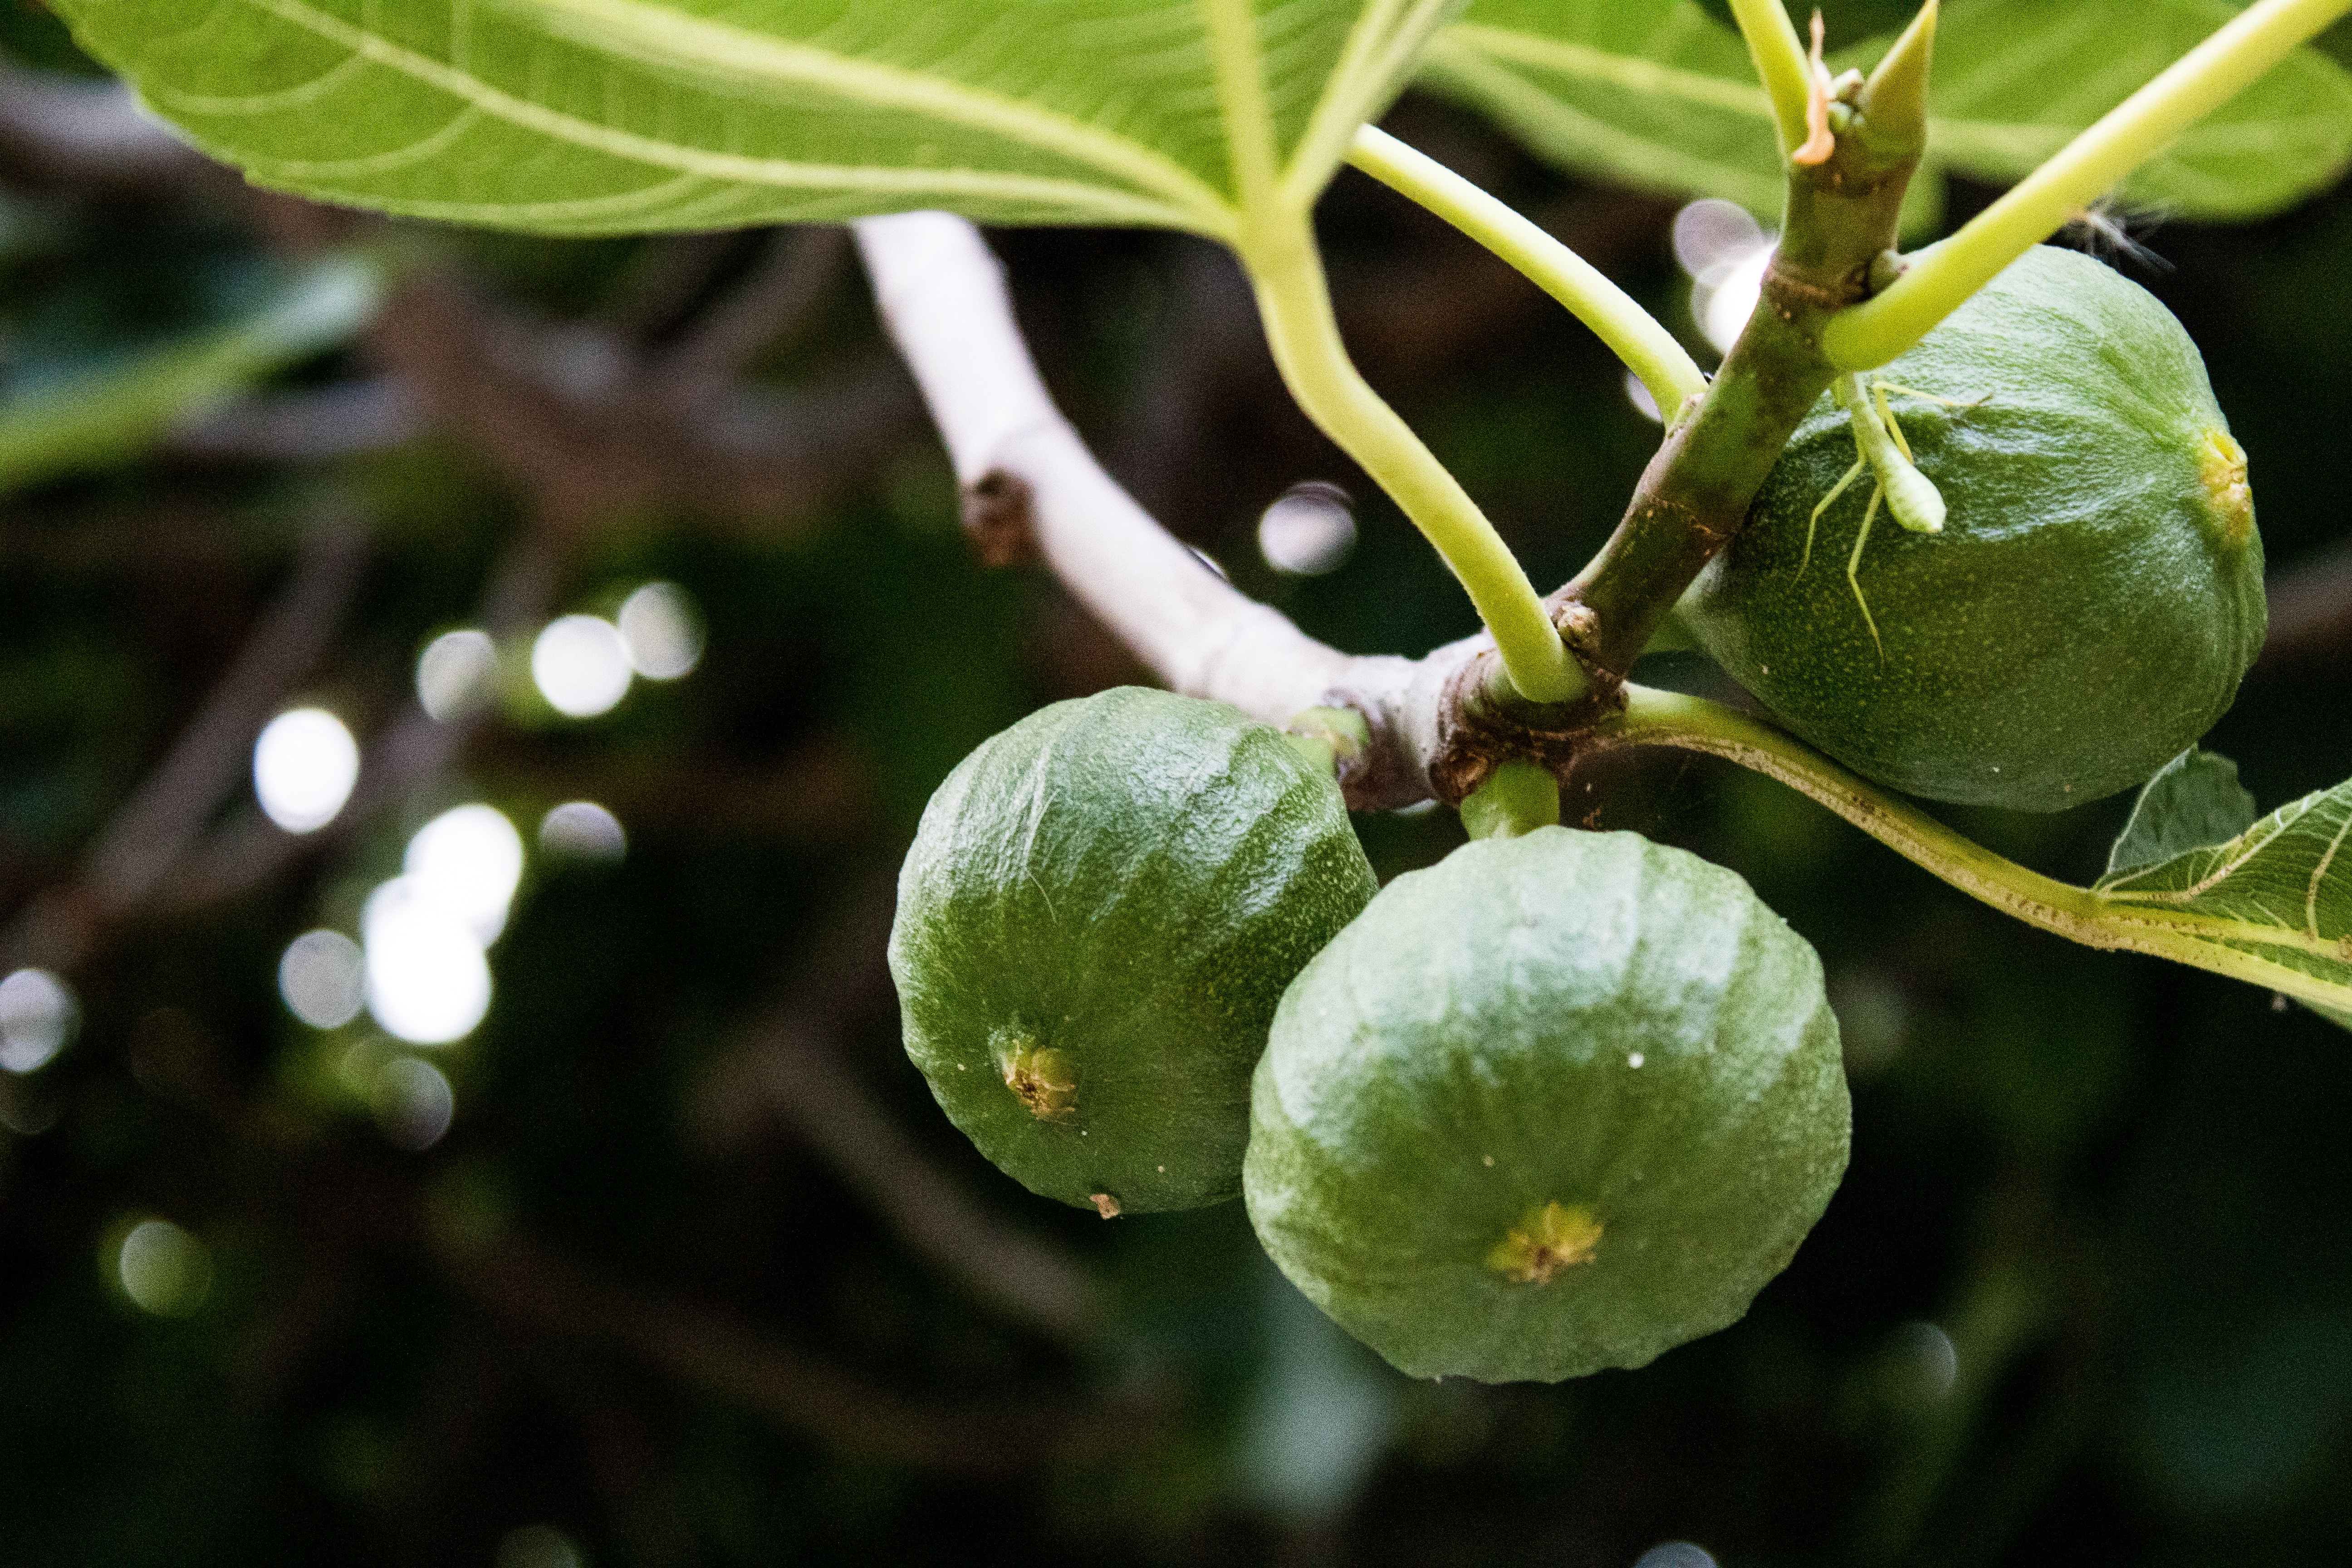 Fruits you can farm and grow in a greenhouse: Figs